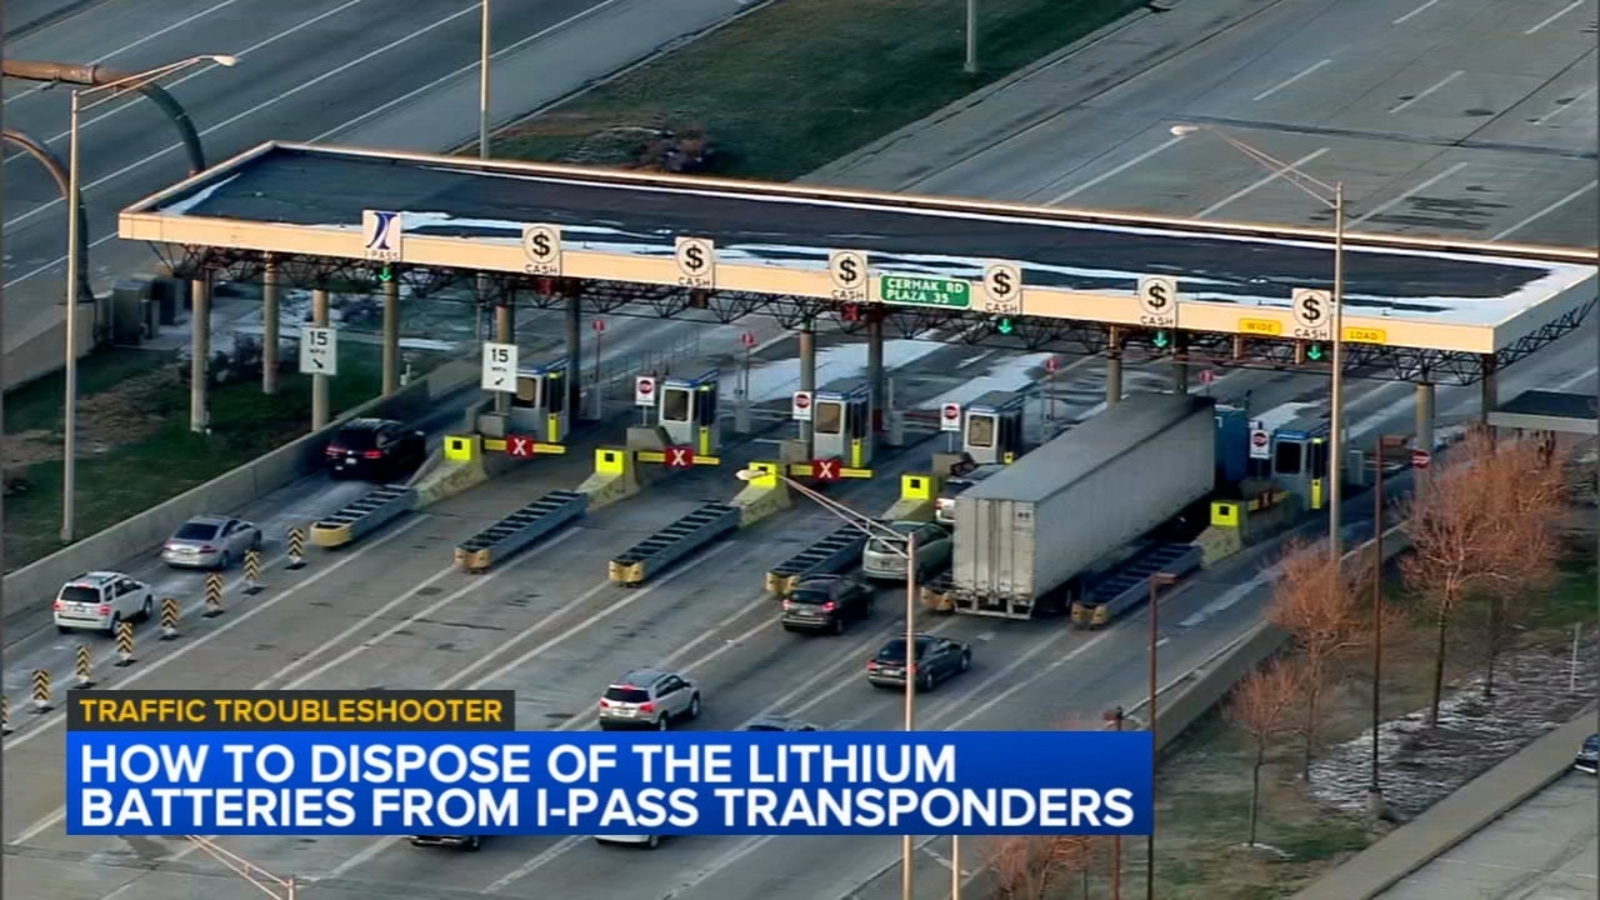 Where to recycle lithium batteries: how to safely dispose old transponders as Illinois Tollway rolls in new I-PASS sticker tags [Video]